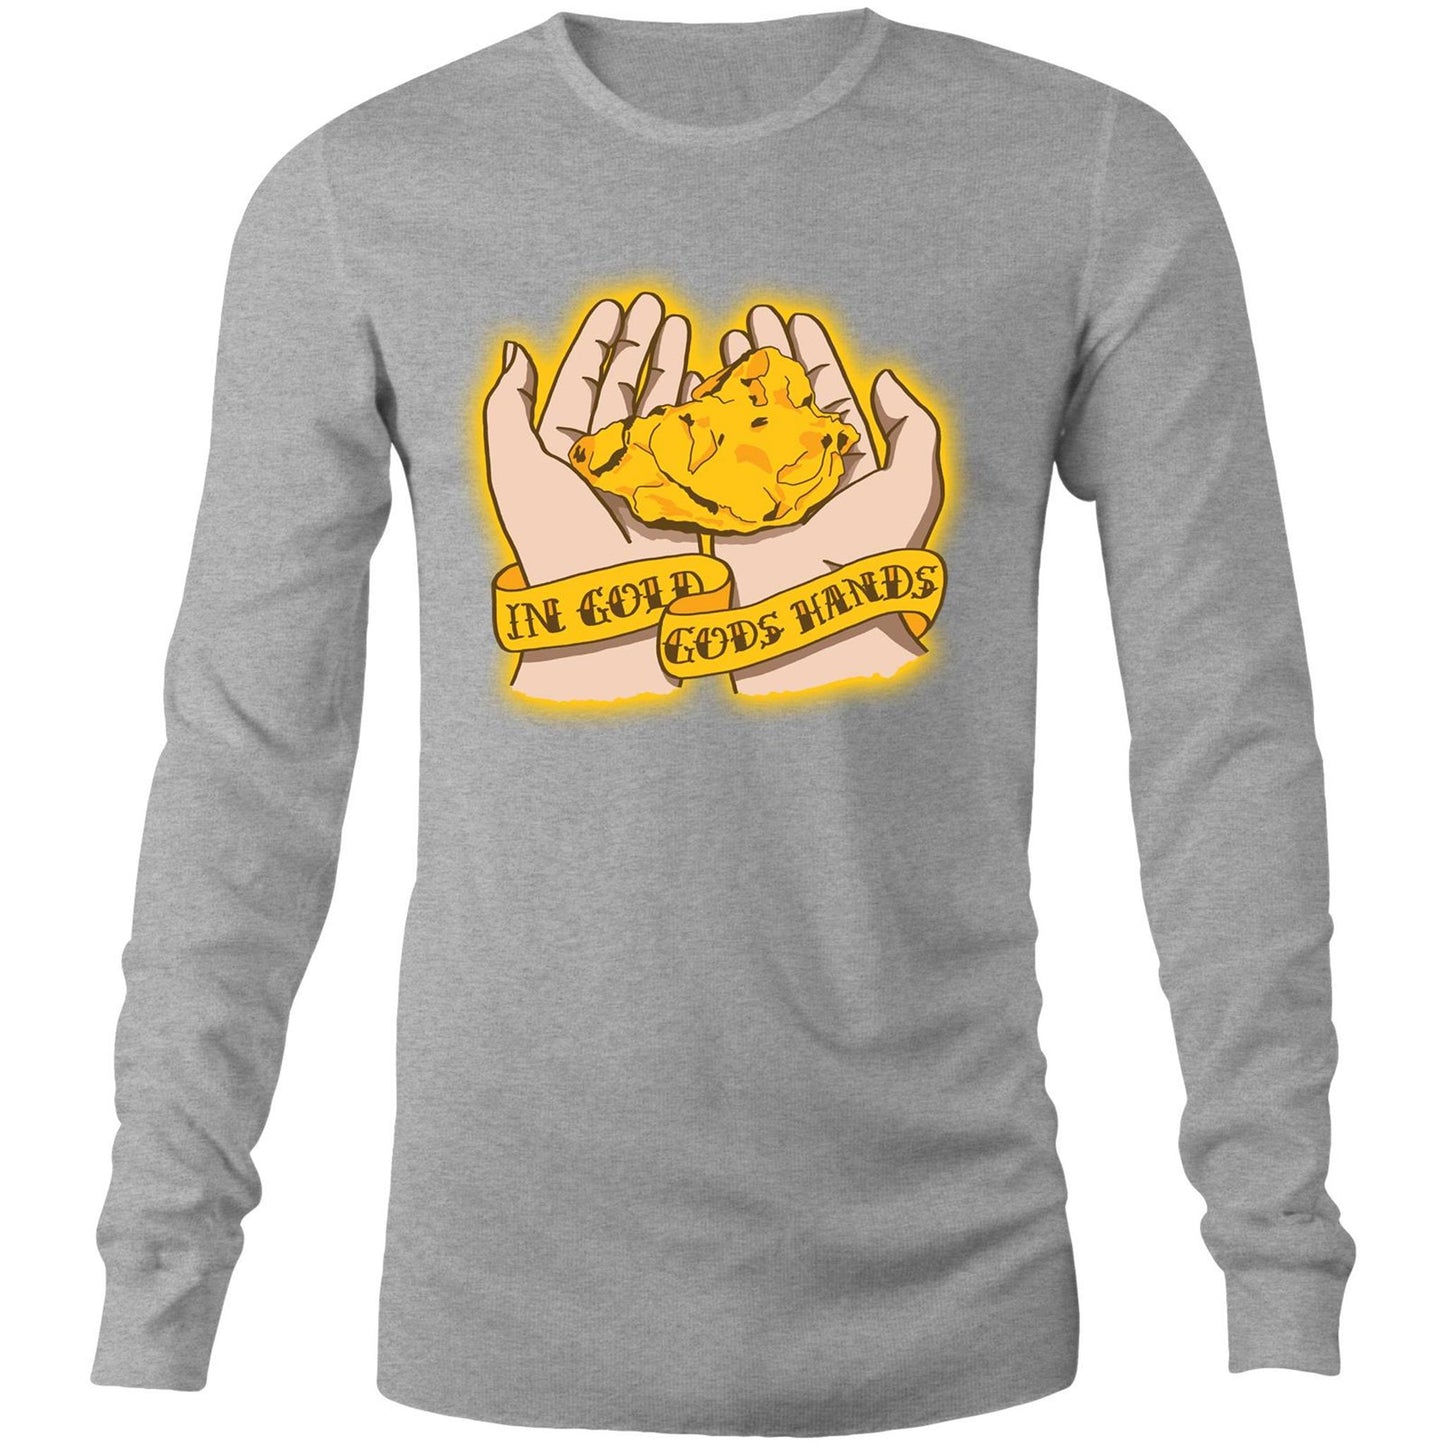 In Gold Gods Hands (AS Colour Base - Mens Long Sleeve T-Shirt)